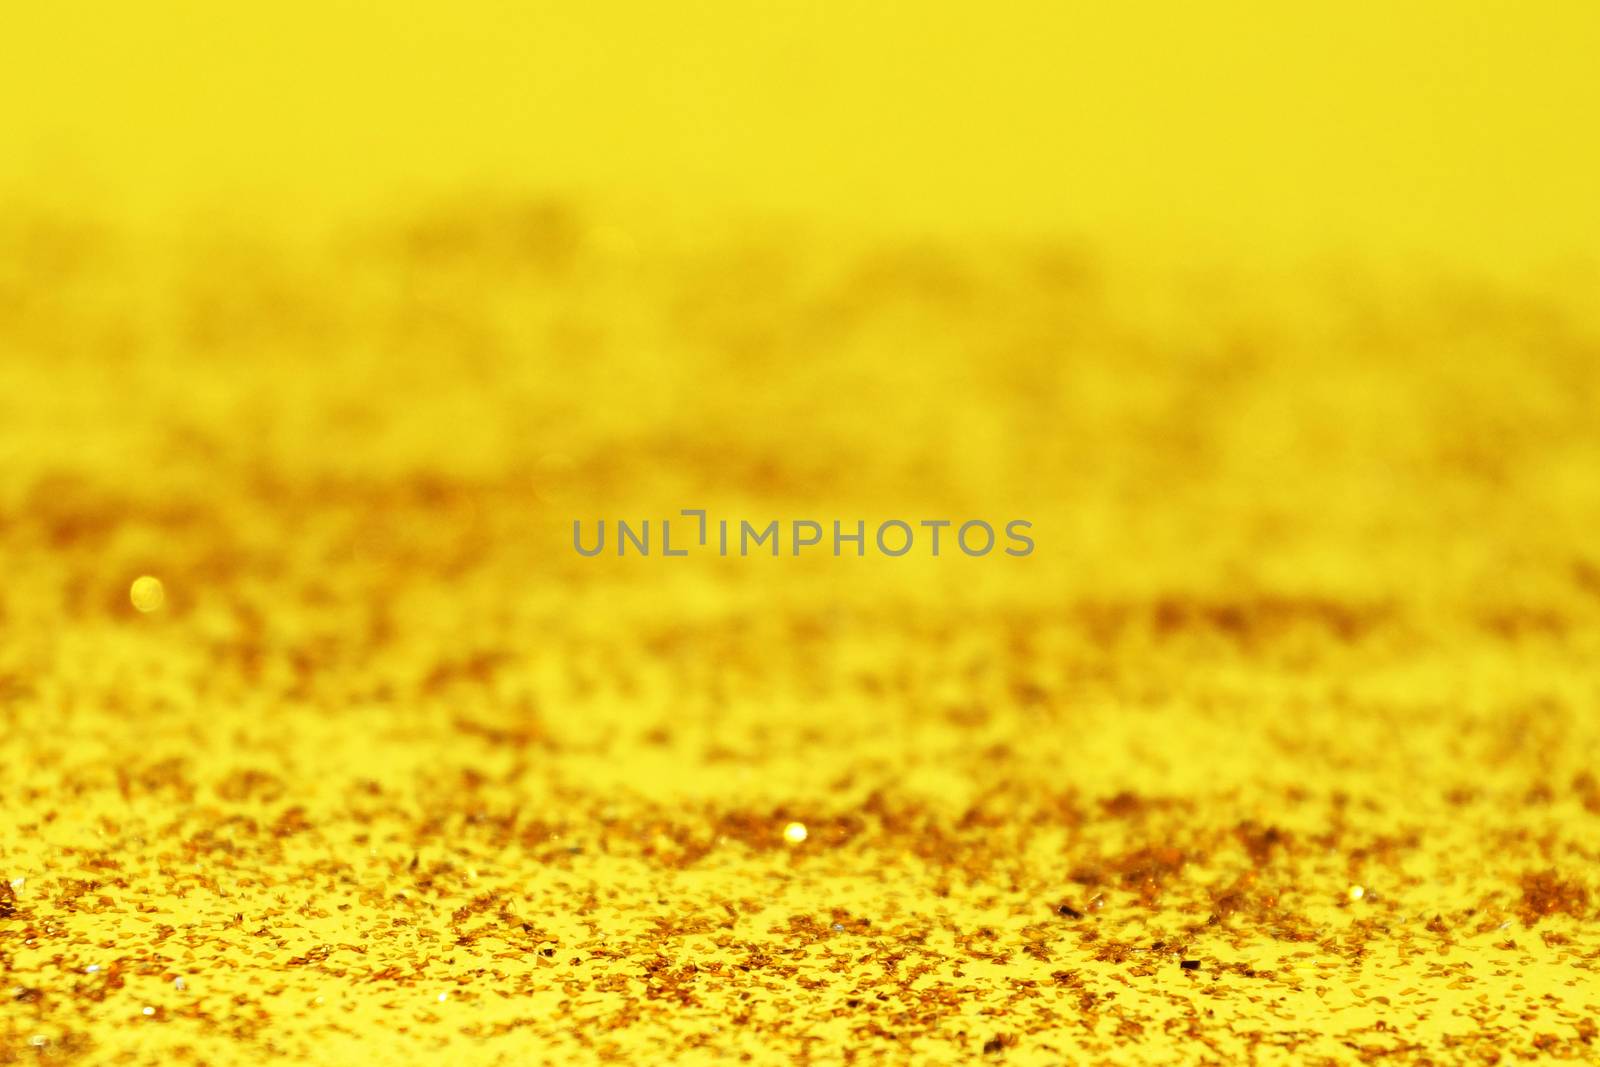 shiny yellow abstraction for festive or autumn background.